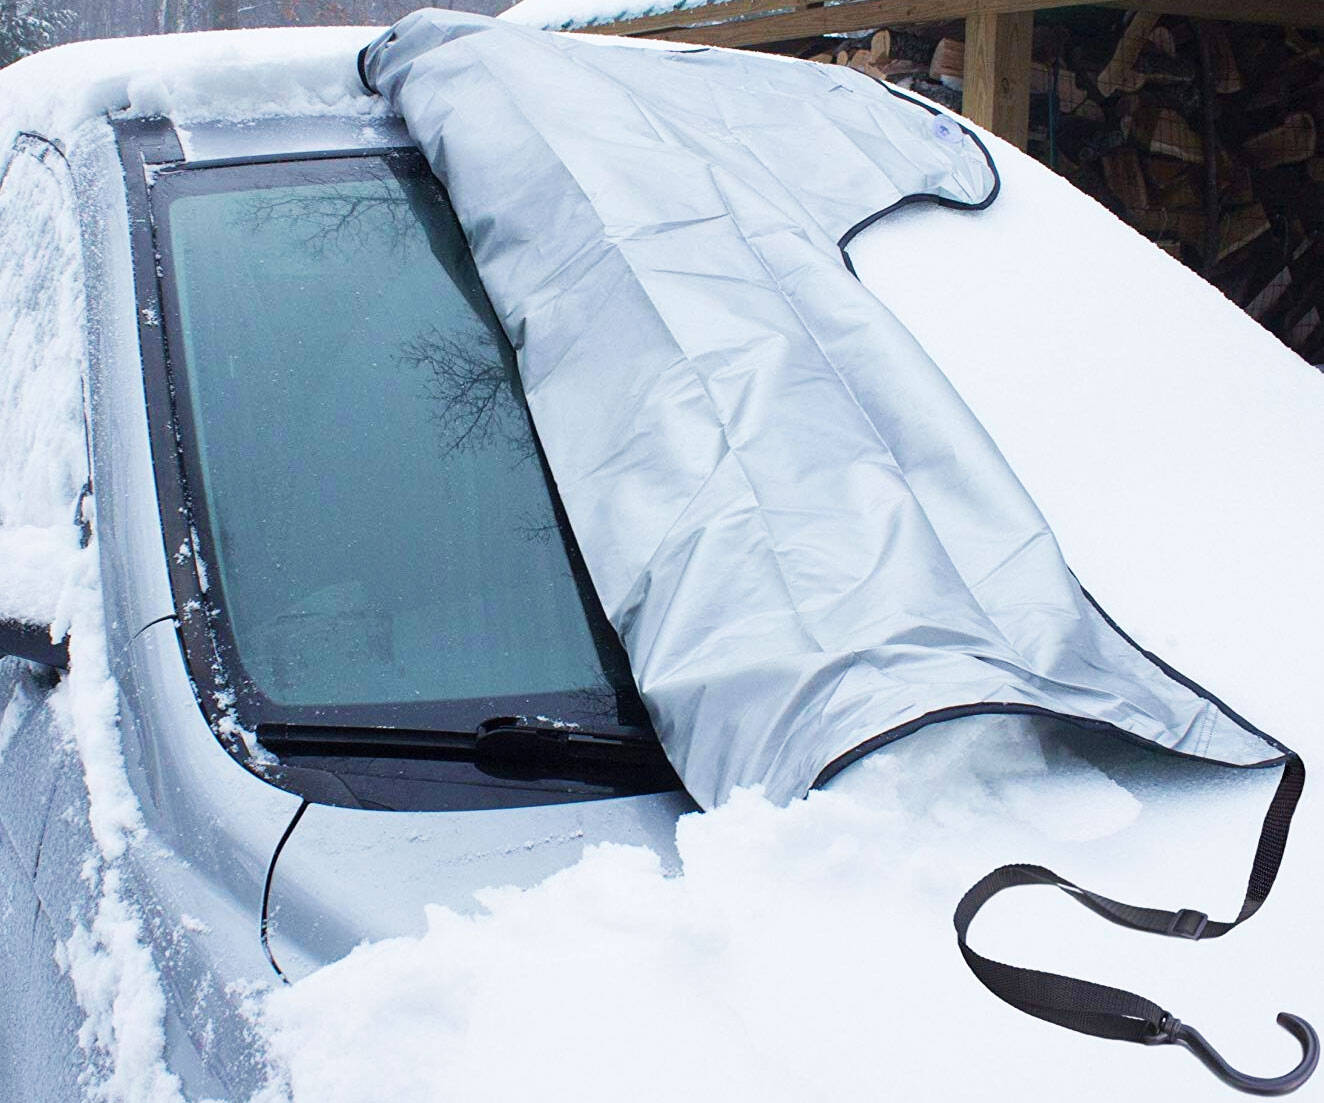 SnowOFF Car Windshield Snow Cover - //coolthings.us